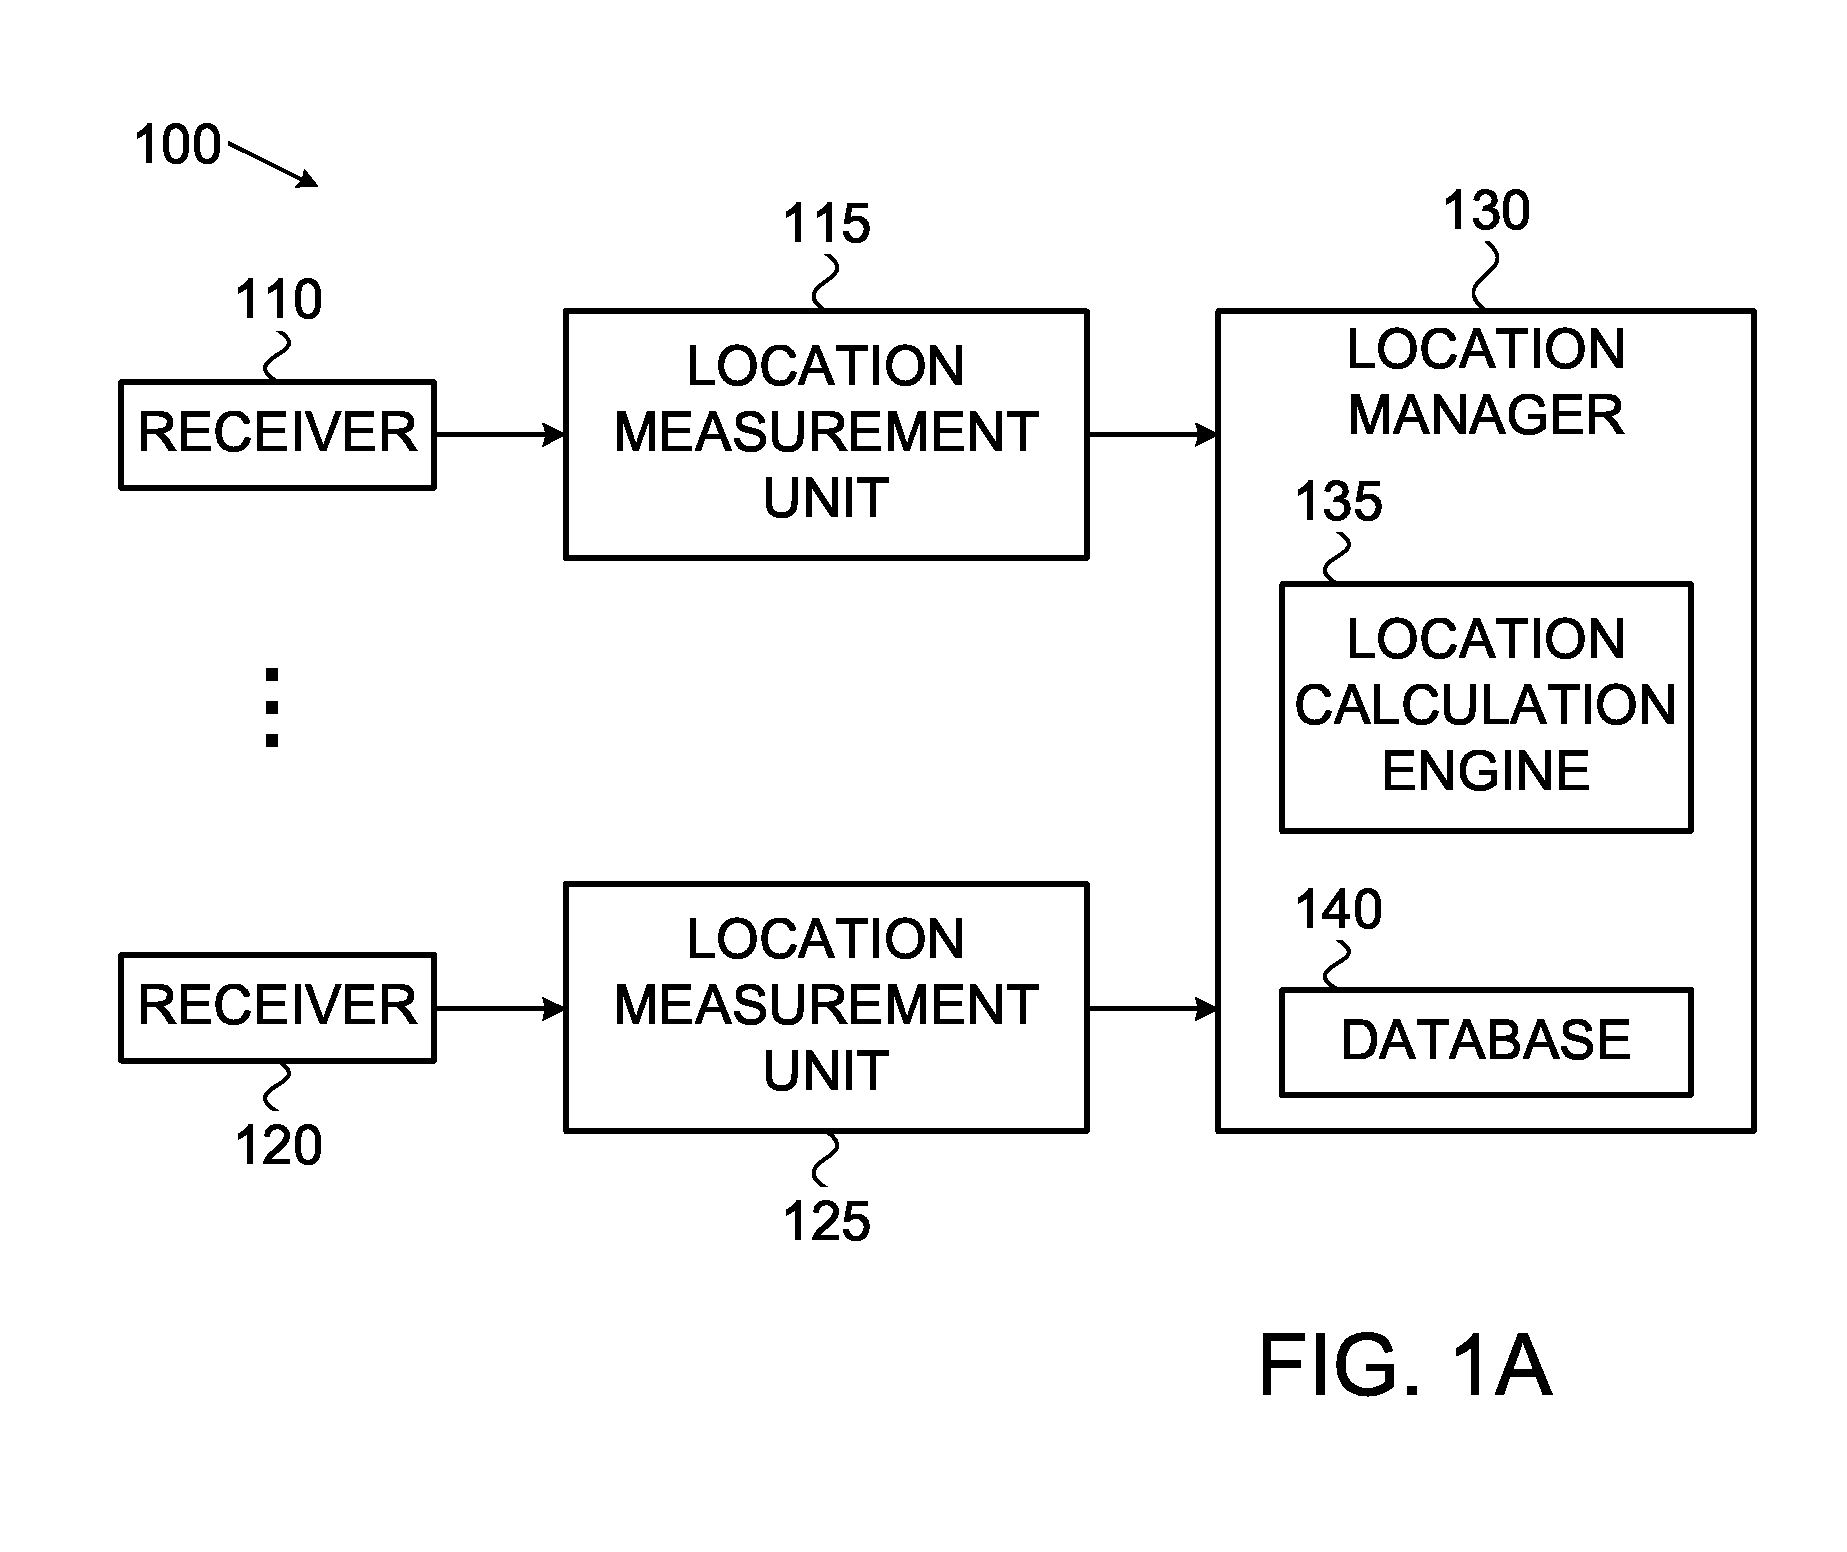 Method and system for estimation of mobile station velocity in a cellular system based on geographical data